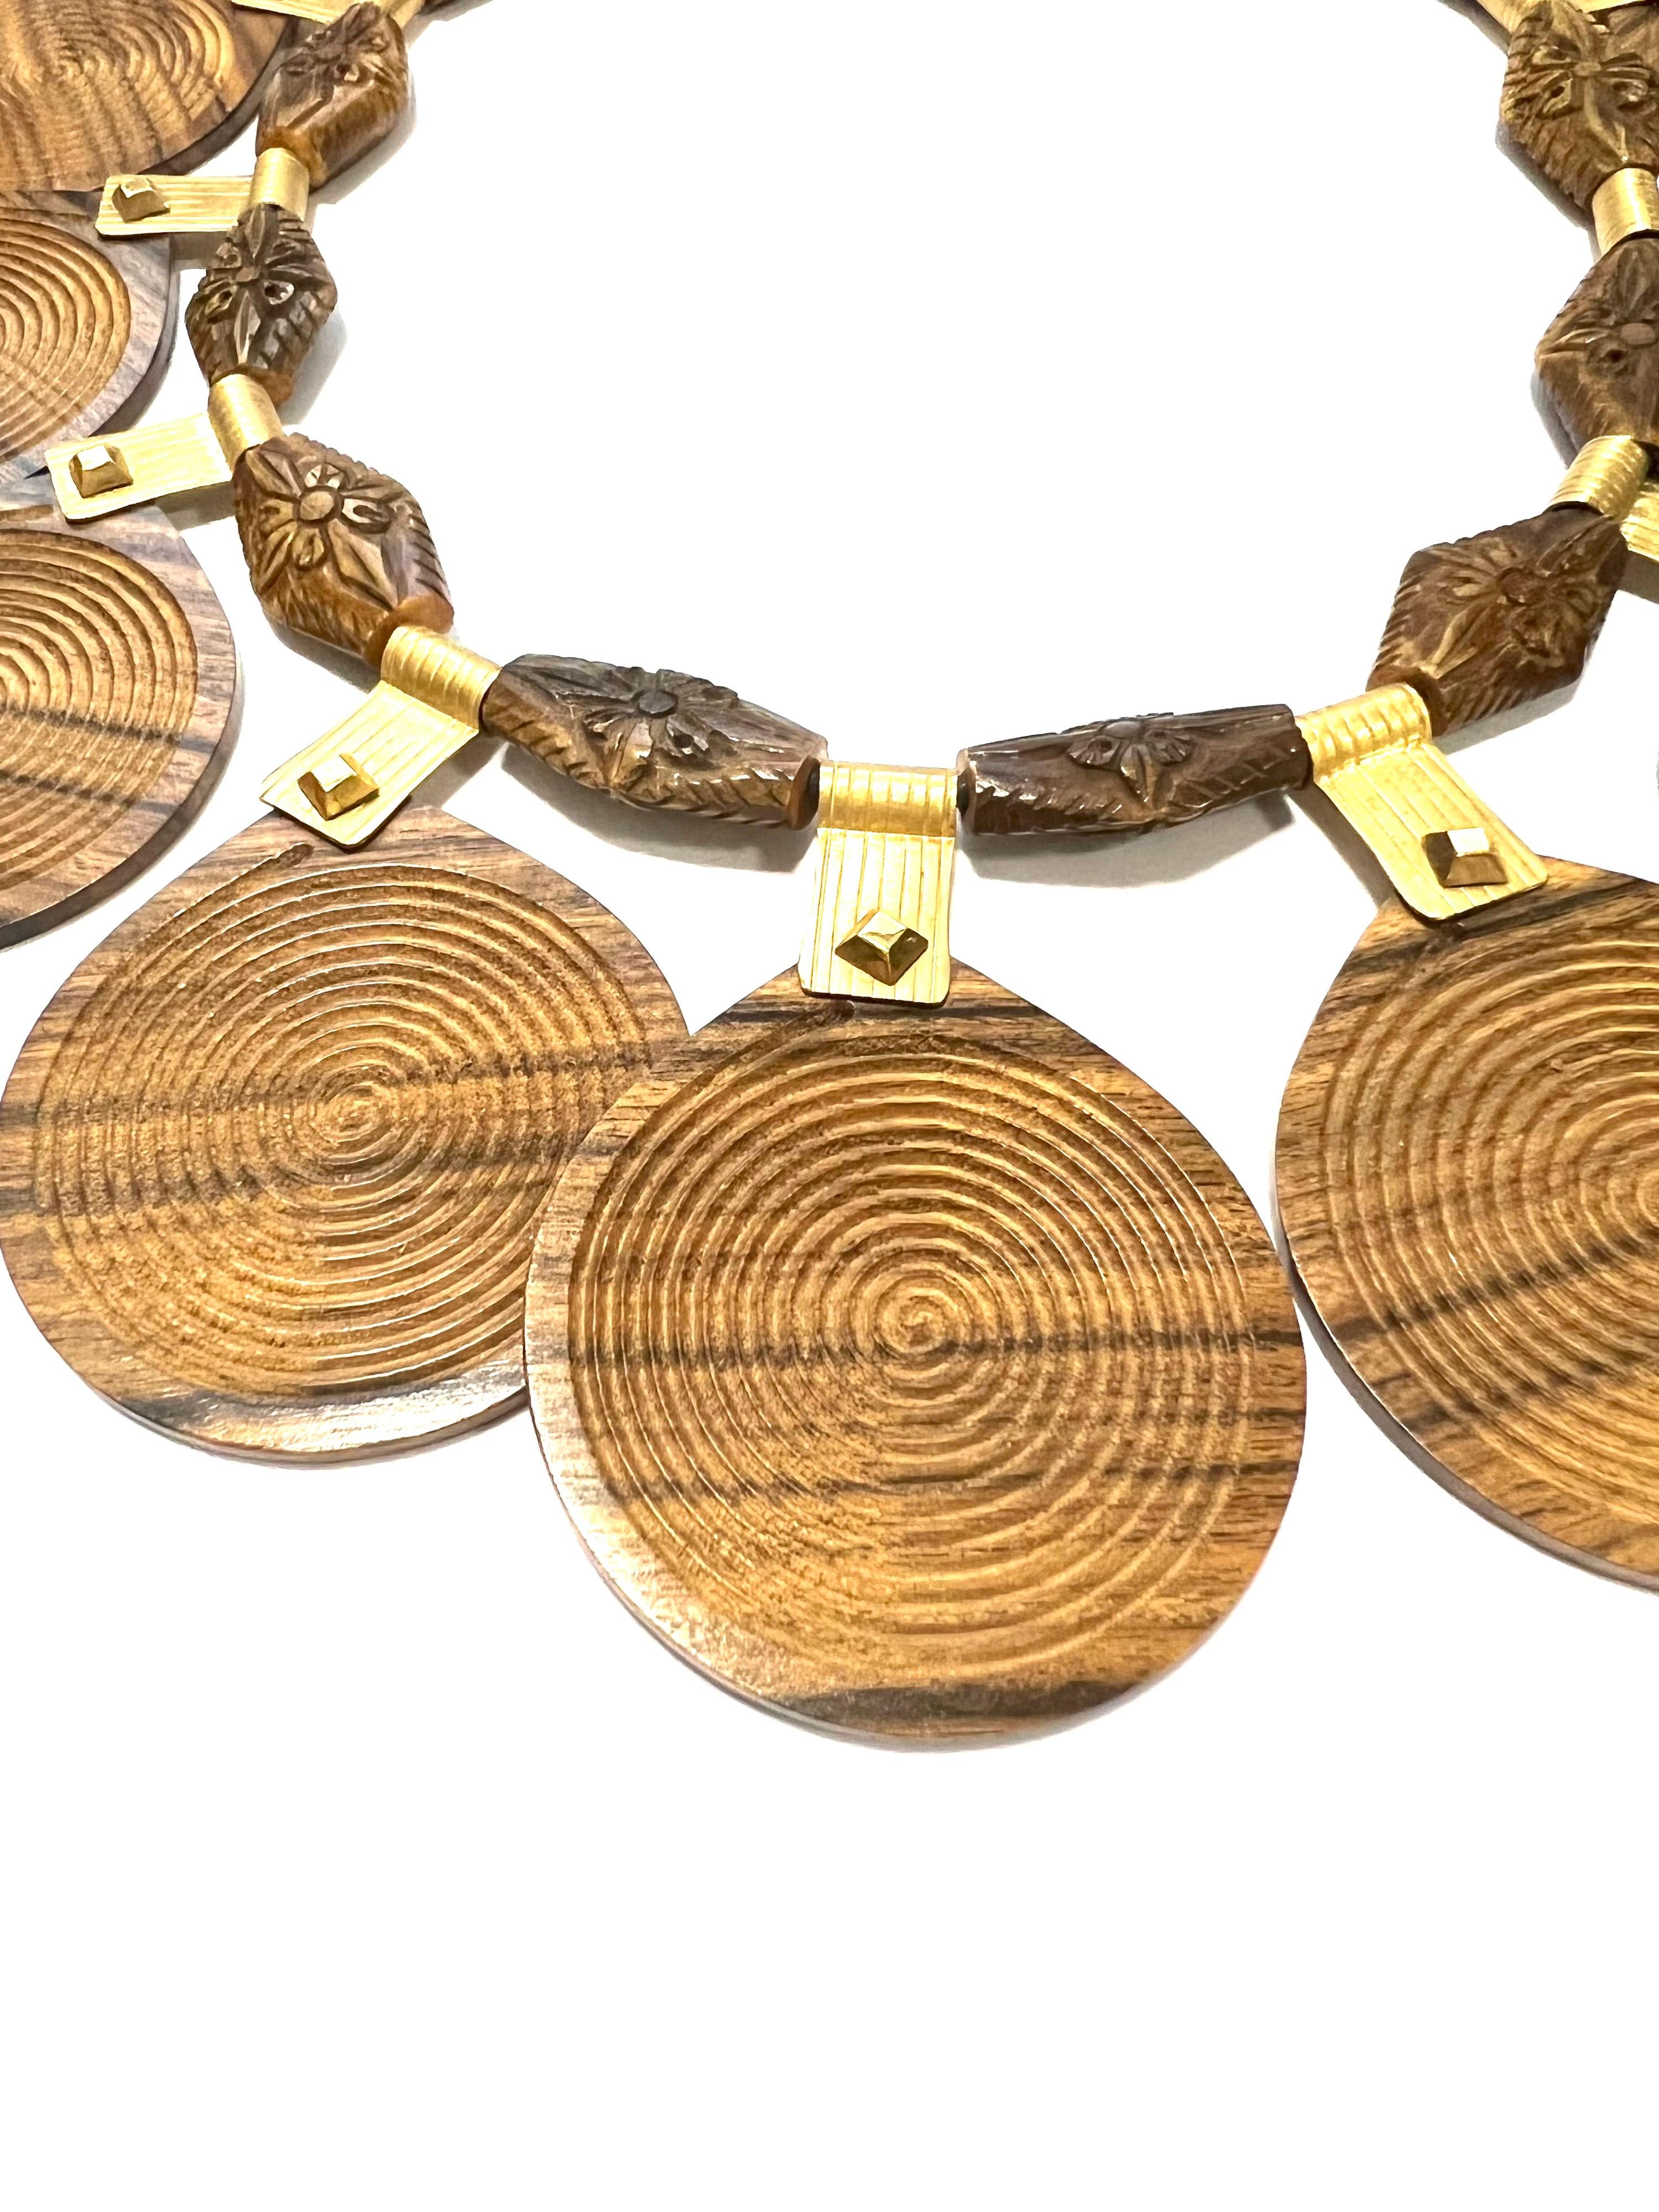 Ethnic Palissander And 18k Yellow Gold Necklace
This necklace is strung on black leather. 10 rosewood engraved interlayers alternate with 9 rosewood pendants hanging fron 18kt satin yellow gold engraved clips.
Total weight gr. 79
Gold weight gr.